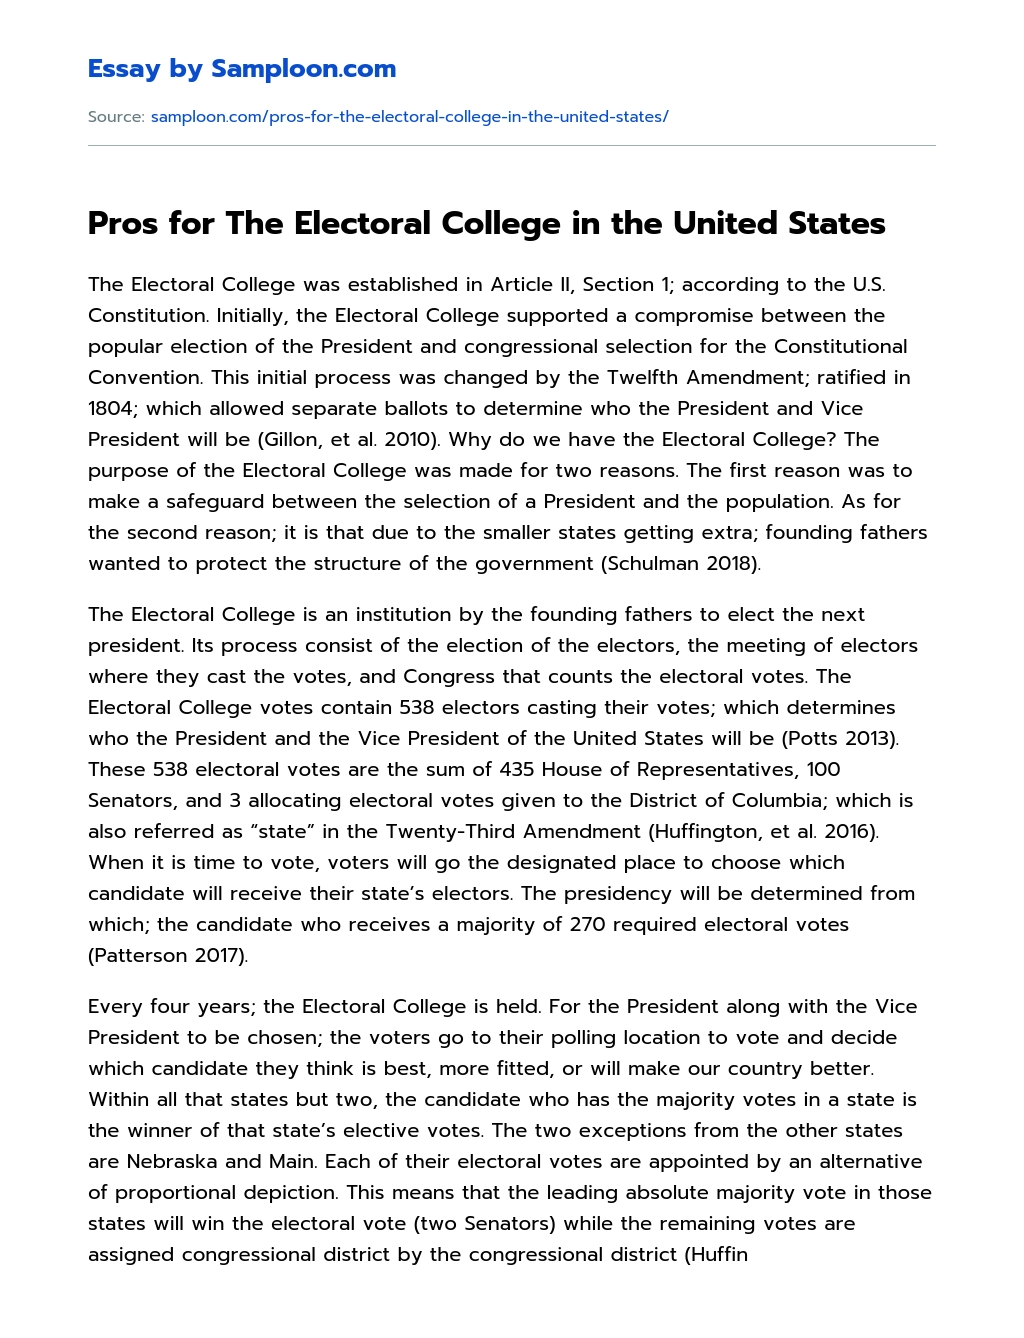 Pros for The Electoral College in the United States essay